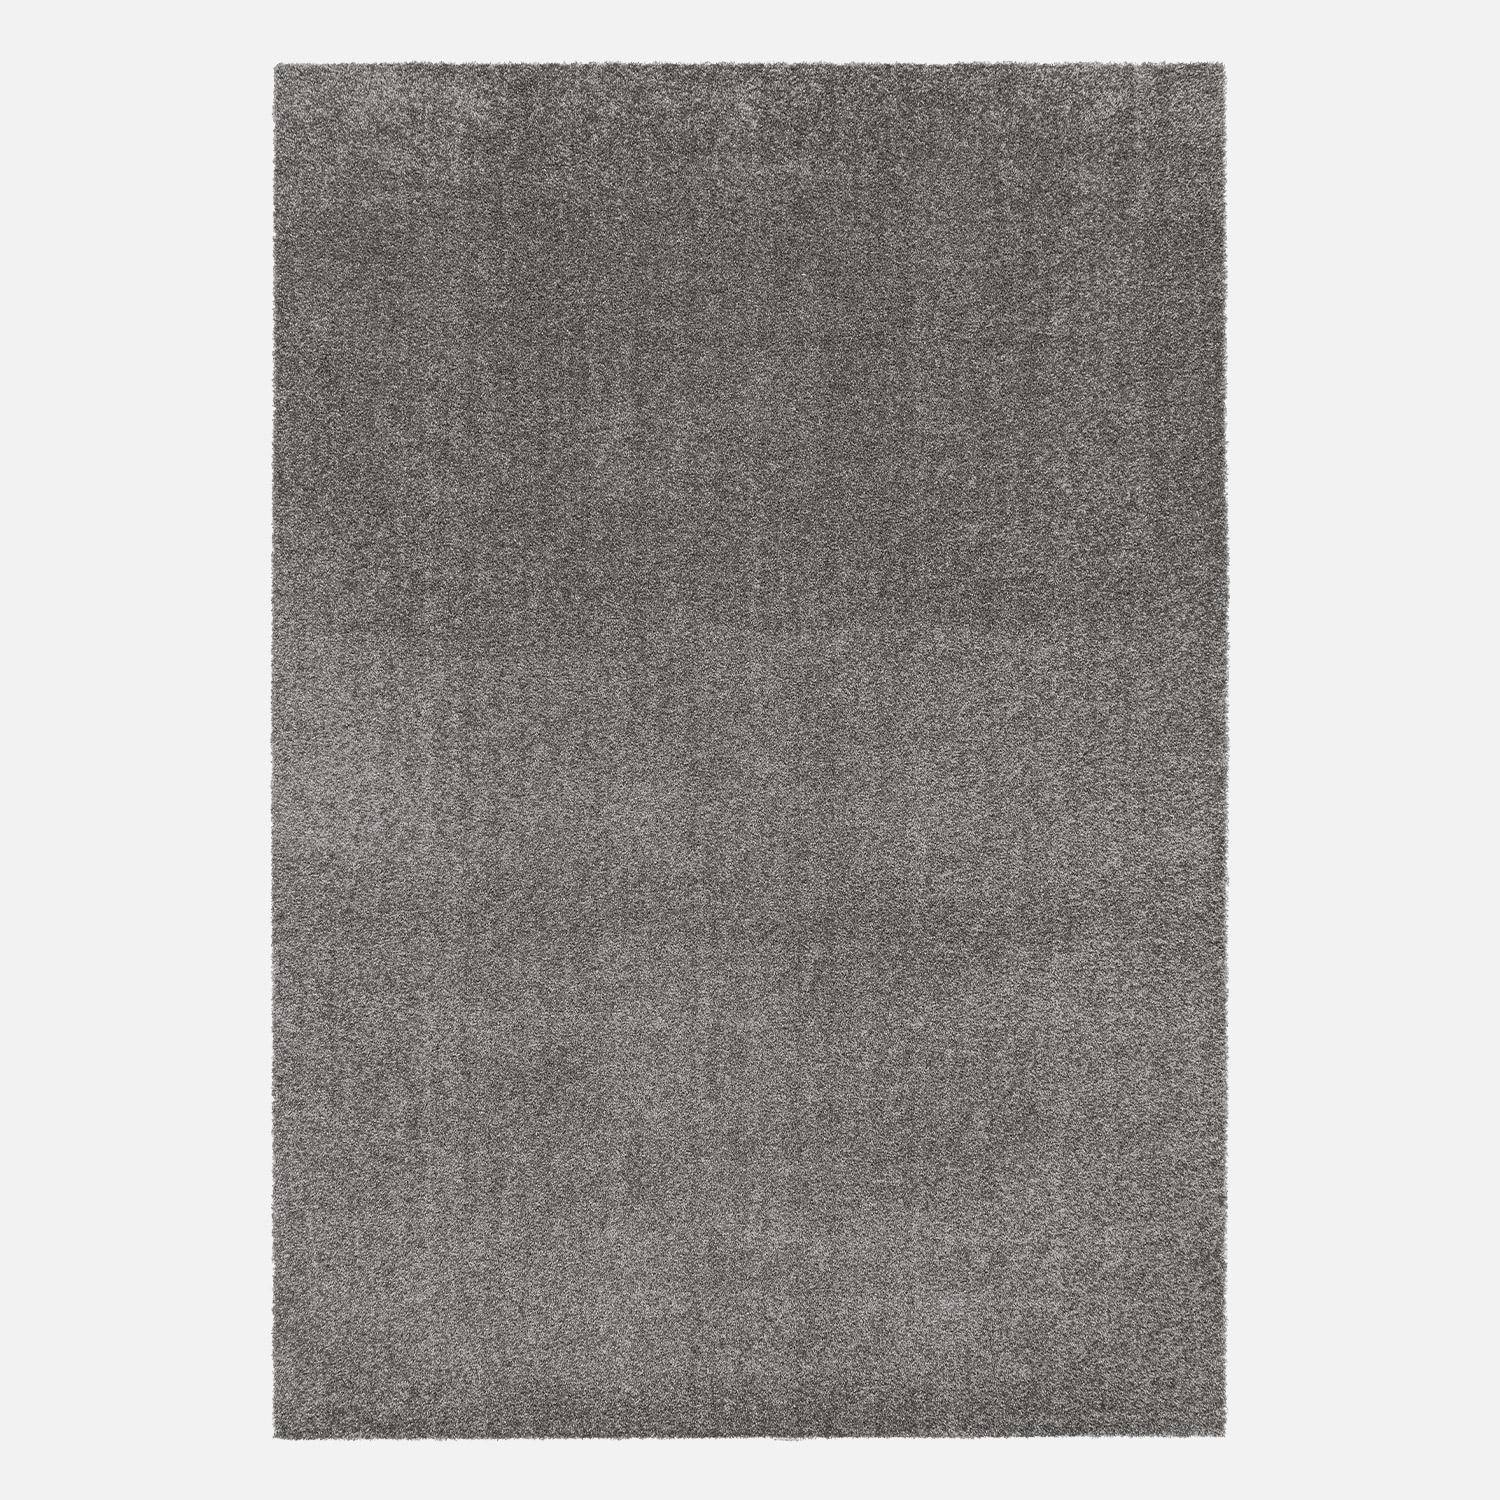 Anthracite grey curly velour interior carpet, Lawrence, 80 x 150 cm,sweeek,Photo4